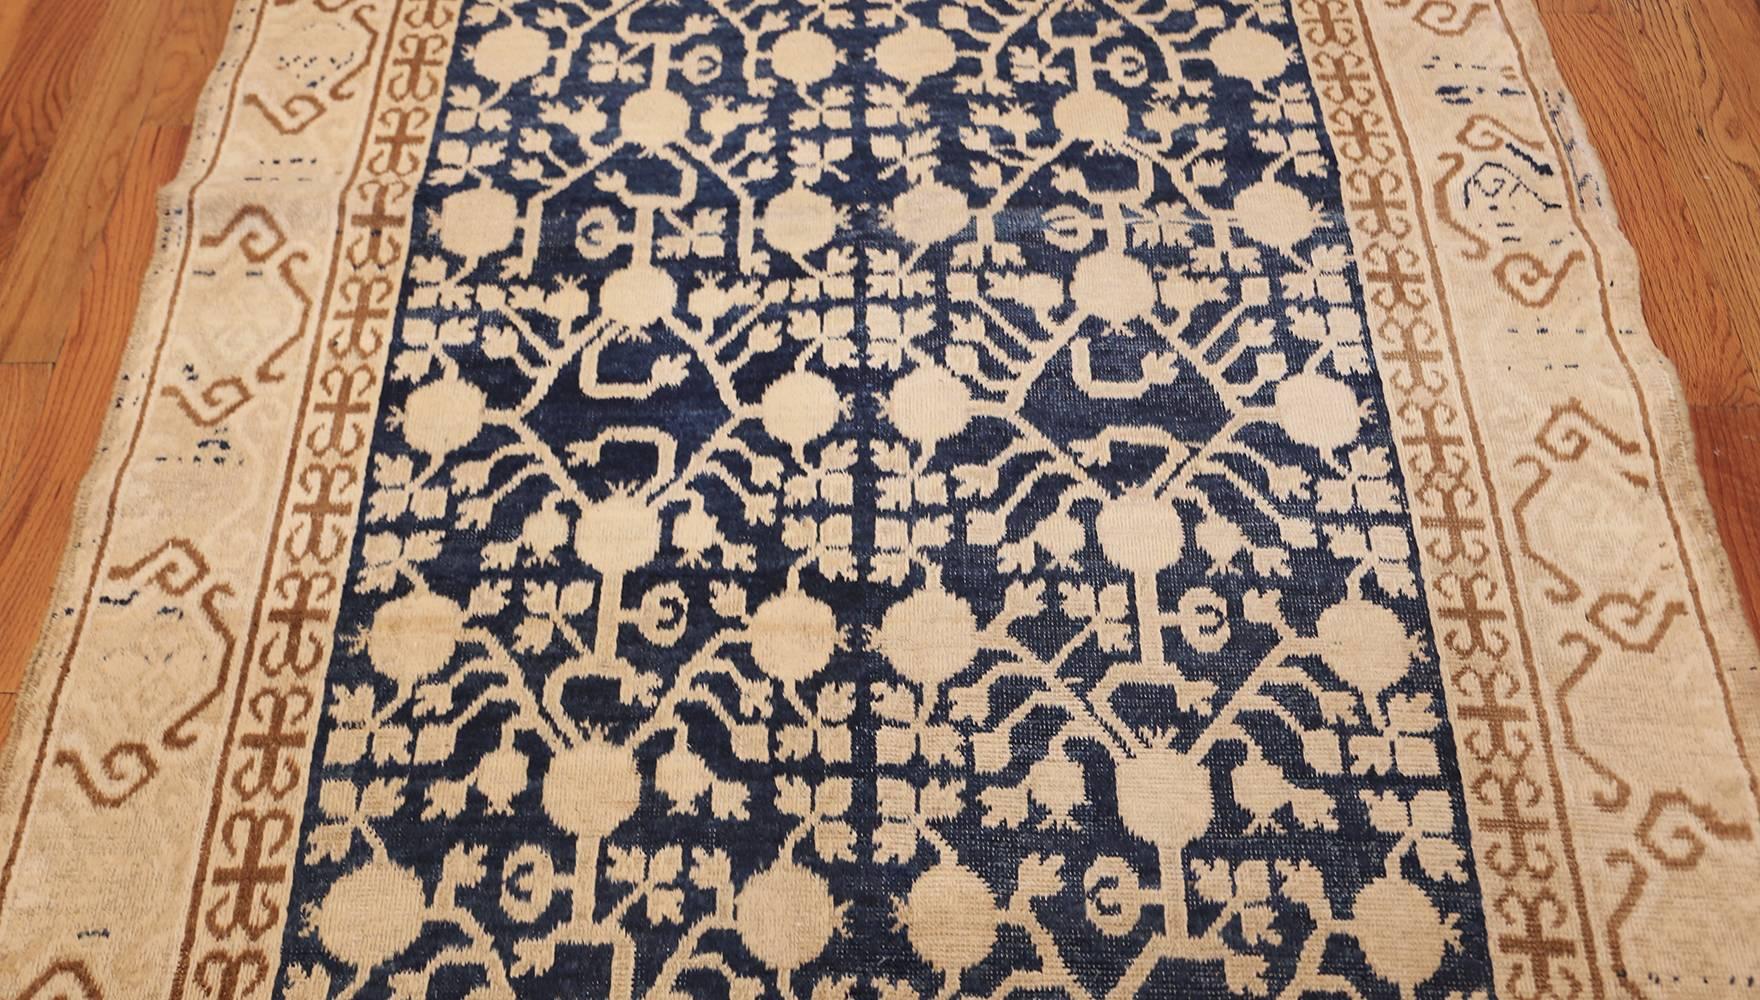 Wool Small Pomegranate Design Antique Khotan Rug. Size: 4 ft 6 in x 8 ft 3 in For Sale